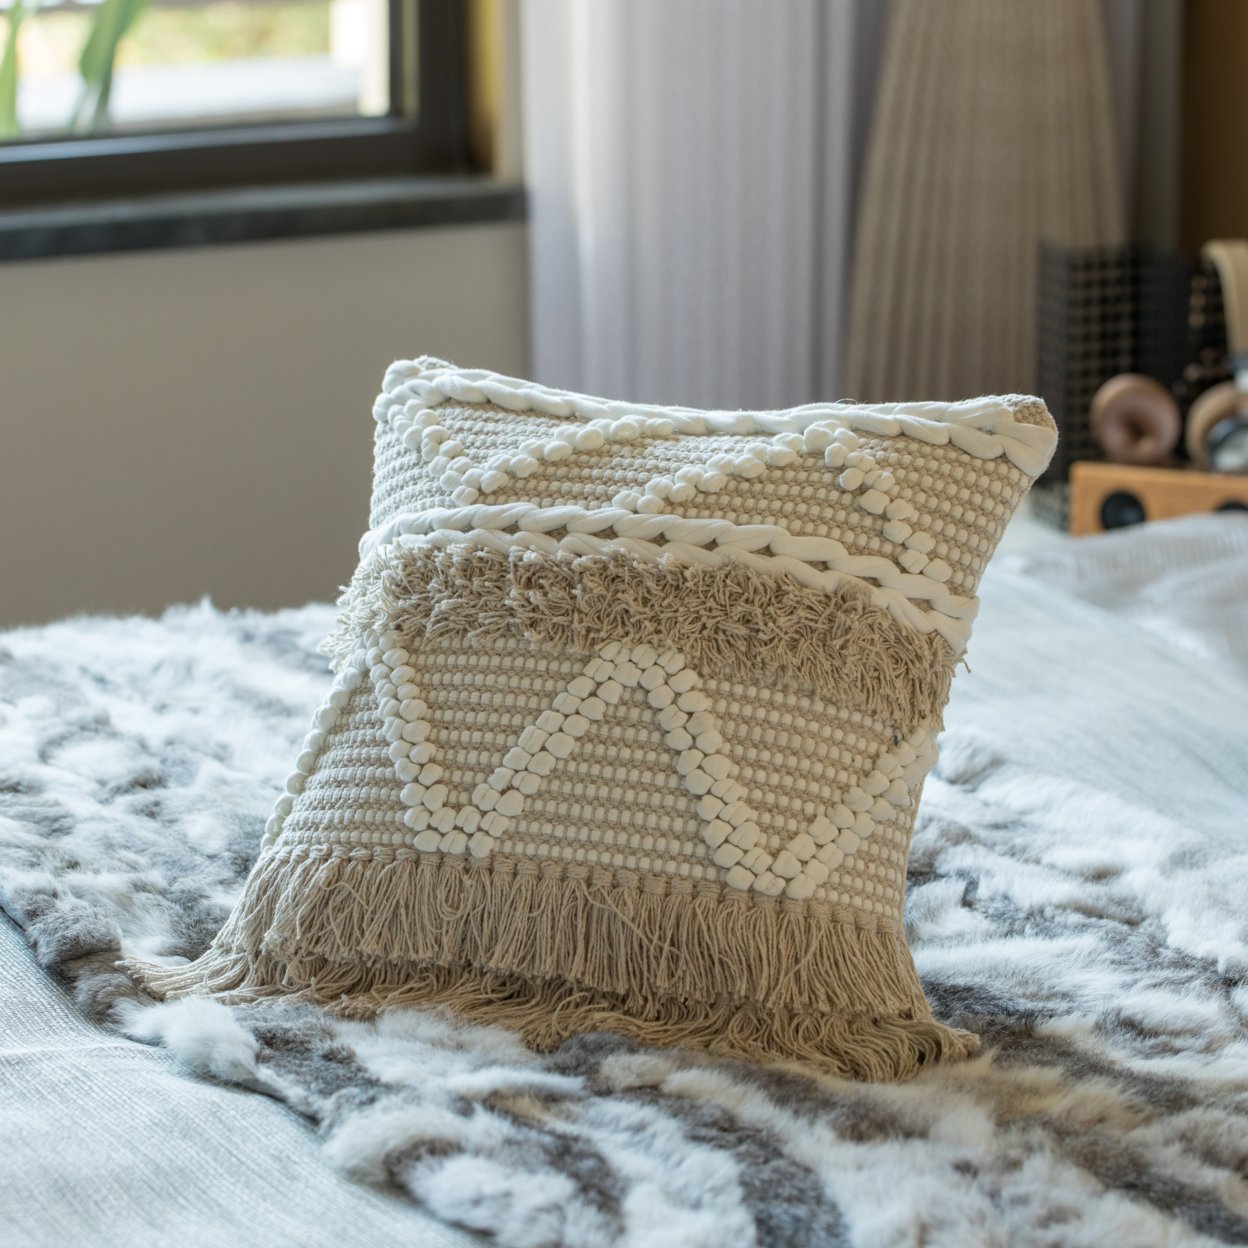 16 Handwoven Cotton Throw Pillow Cover With White Dot Pattern And Natural Tassel Fringe Lines - Pillowcase With Cushion